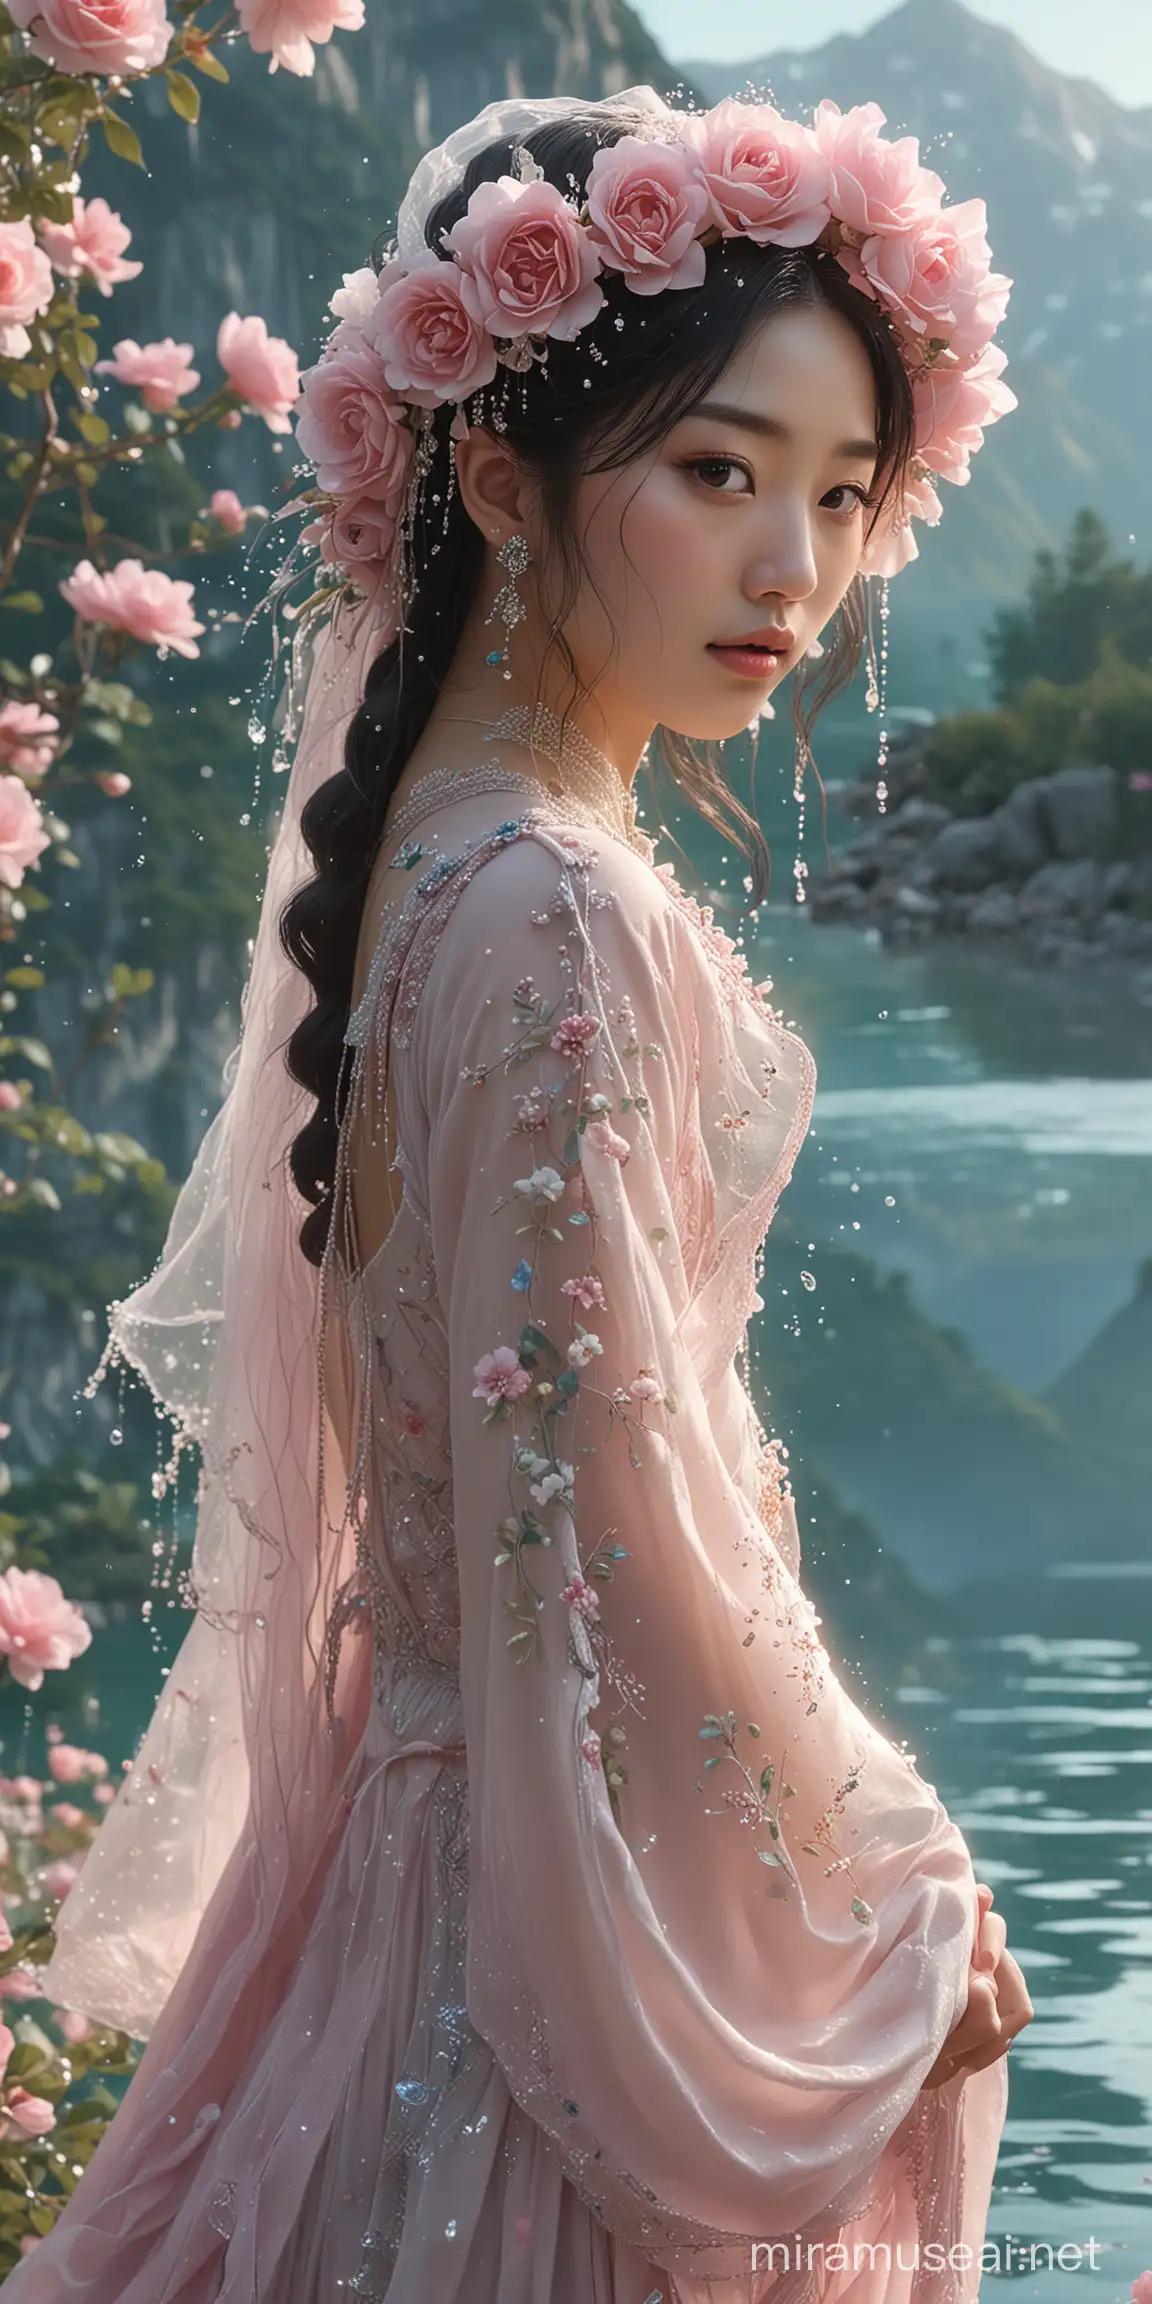 The image is a digitally created featuring a **beautiful female Korean looking**. The character is adorned in an elegant, flowing dress that appears to be made of water or some ethereal material. She wears a decorative headpiece with flowers and beads hanging down beside her face. The background depicts a serene and magical landscape with towering mountains, a calm lake surrounded by blooming pink roses. Water splashes around her, adding to the mystical aura of the scene. The color palette consists of soft pinks, blues, and greens creating an enchanting atmosphere. hyperrealistic. UHD extreme